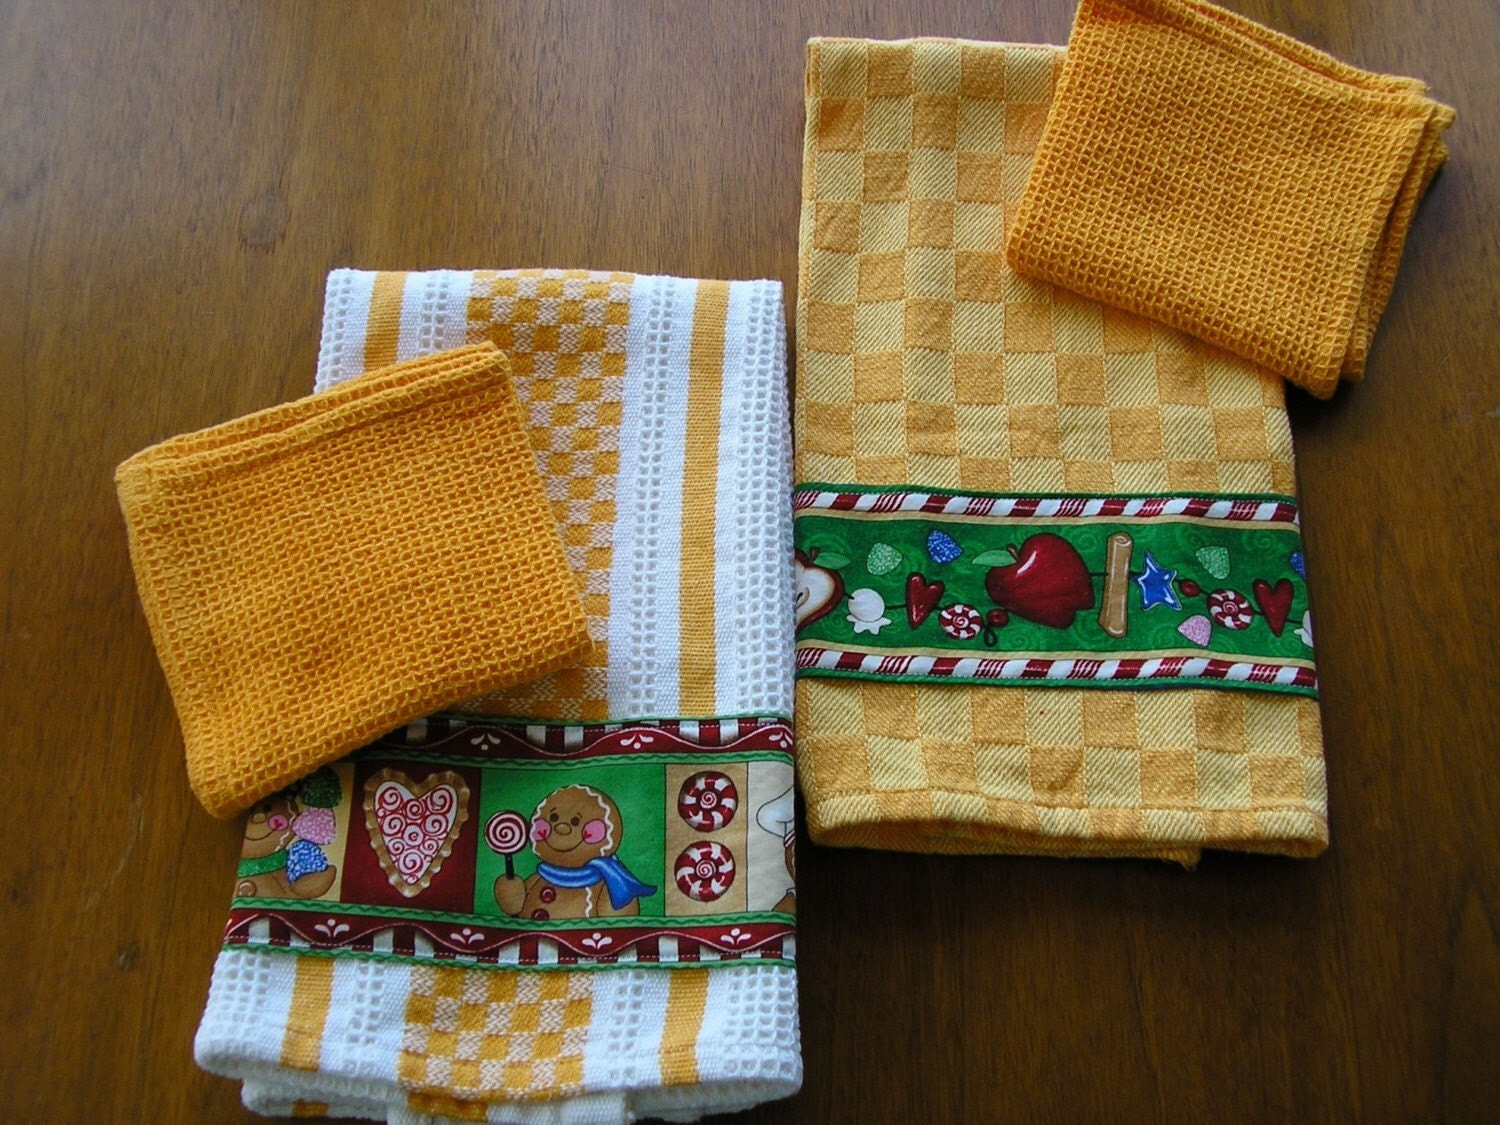 Free Knitting Patterns For Dishcloths, Wash Cloths, Hot Pads, and